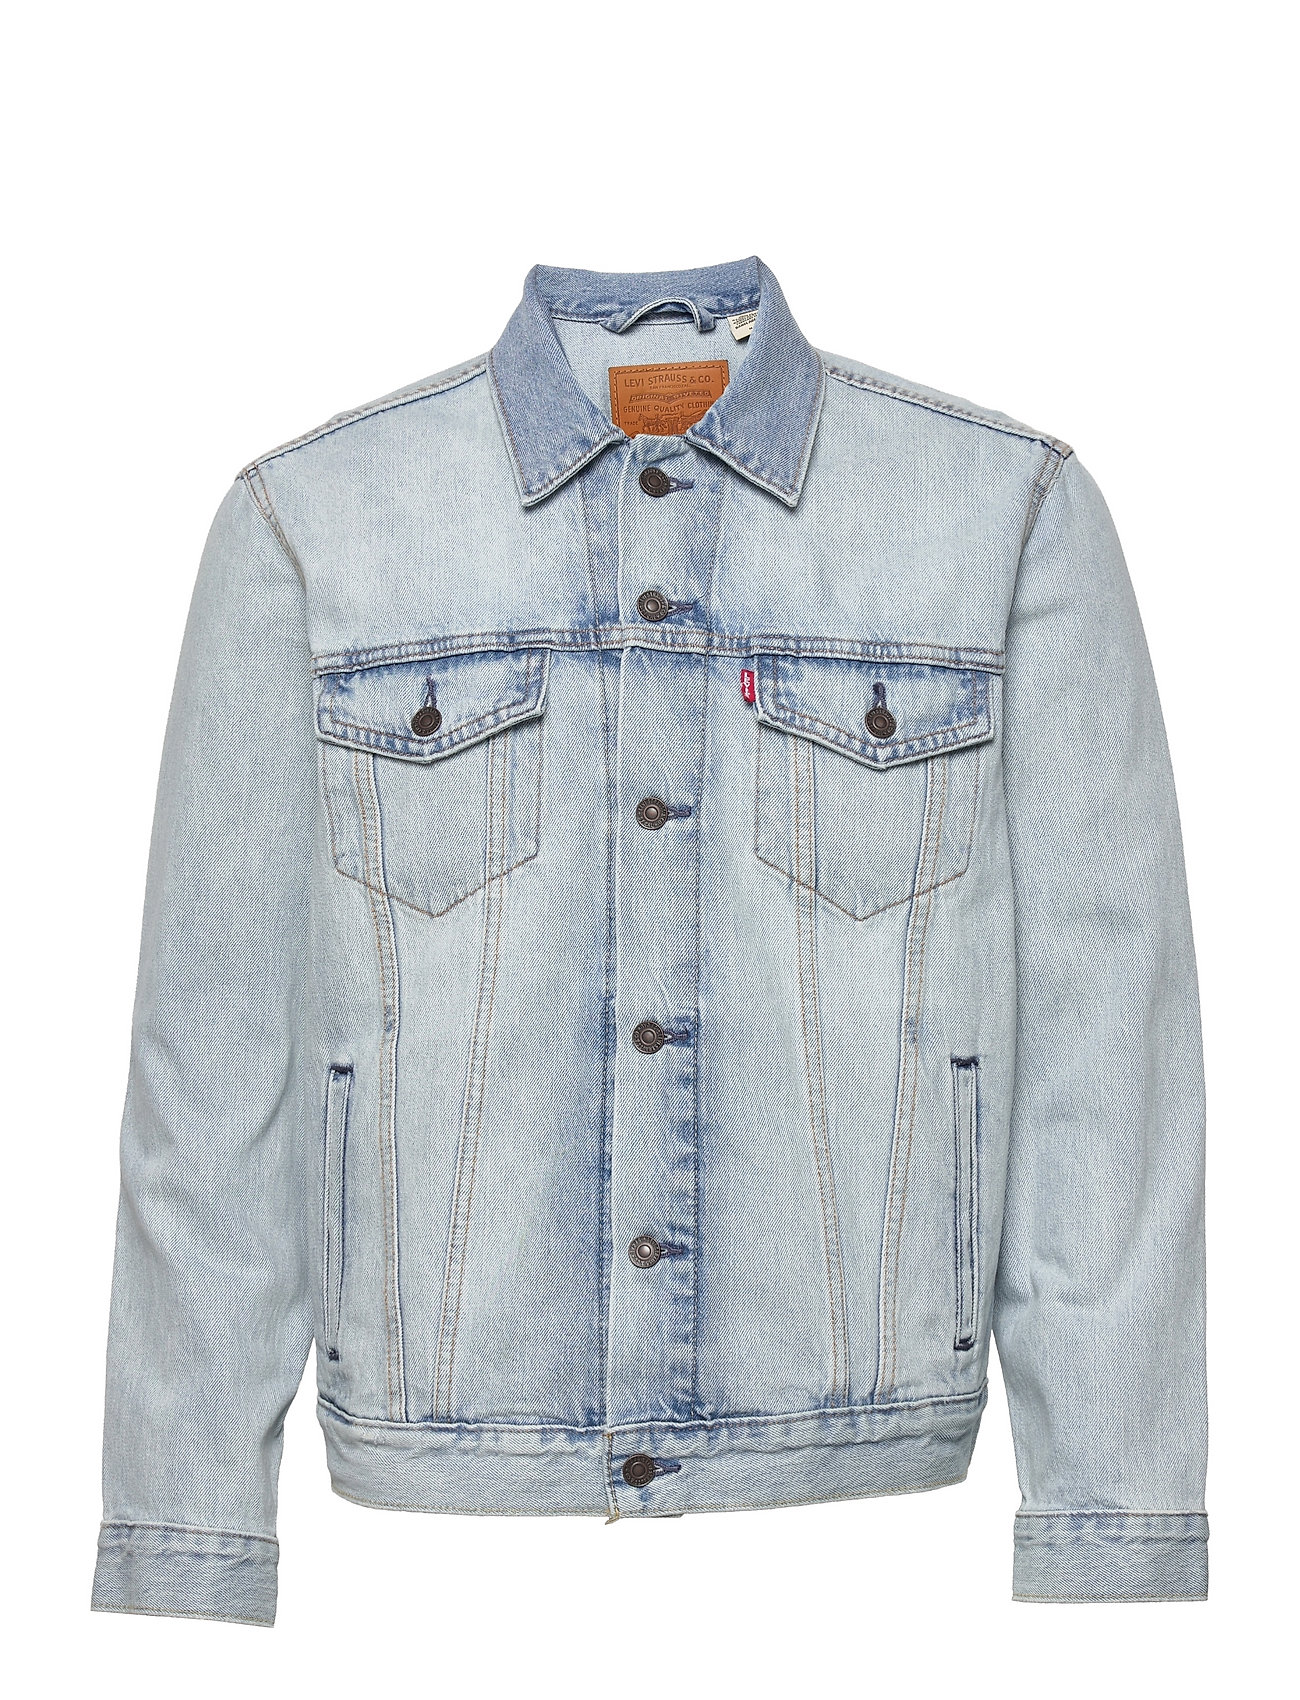 LEVI´S Men The Trucker Jacket New Light T - 78 €. Buy Denim Jackets from  LEVI´S Men online at . Fast delivery and easy returns